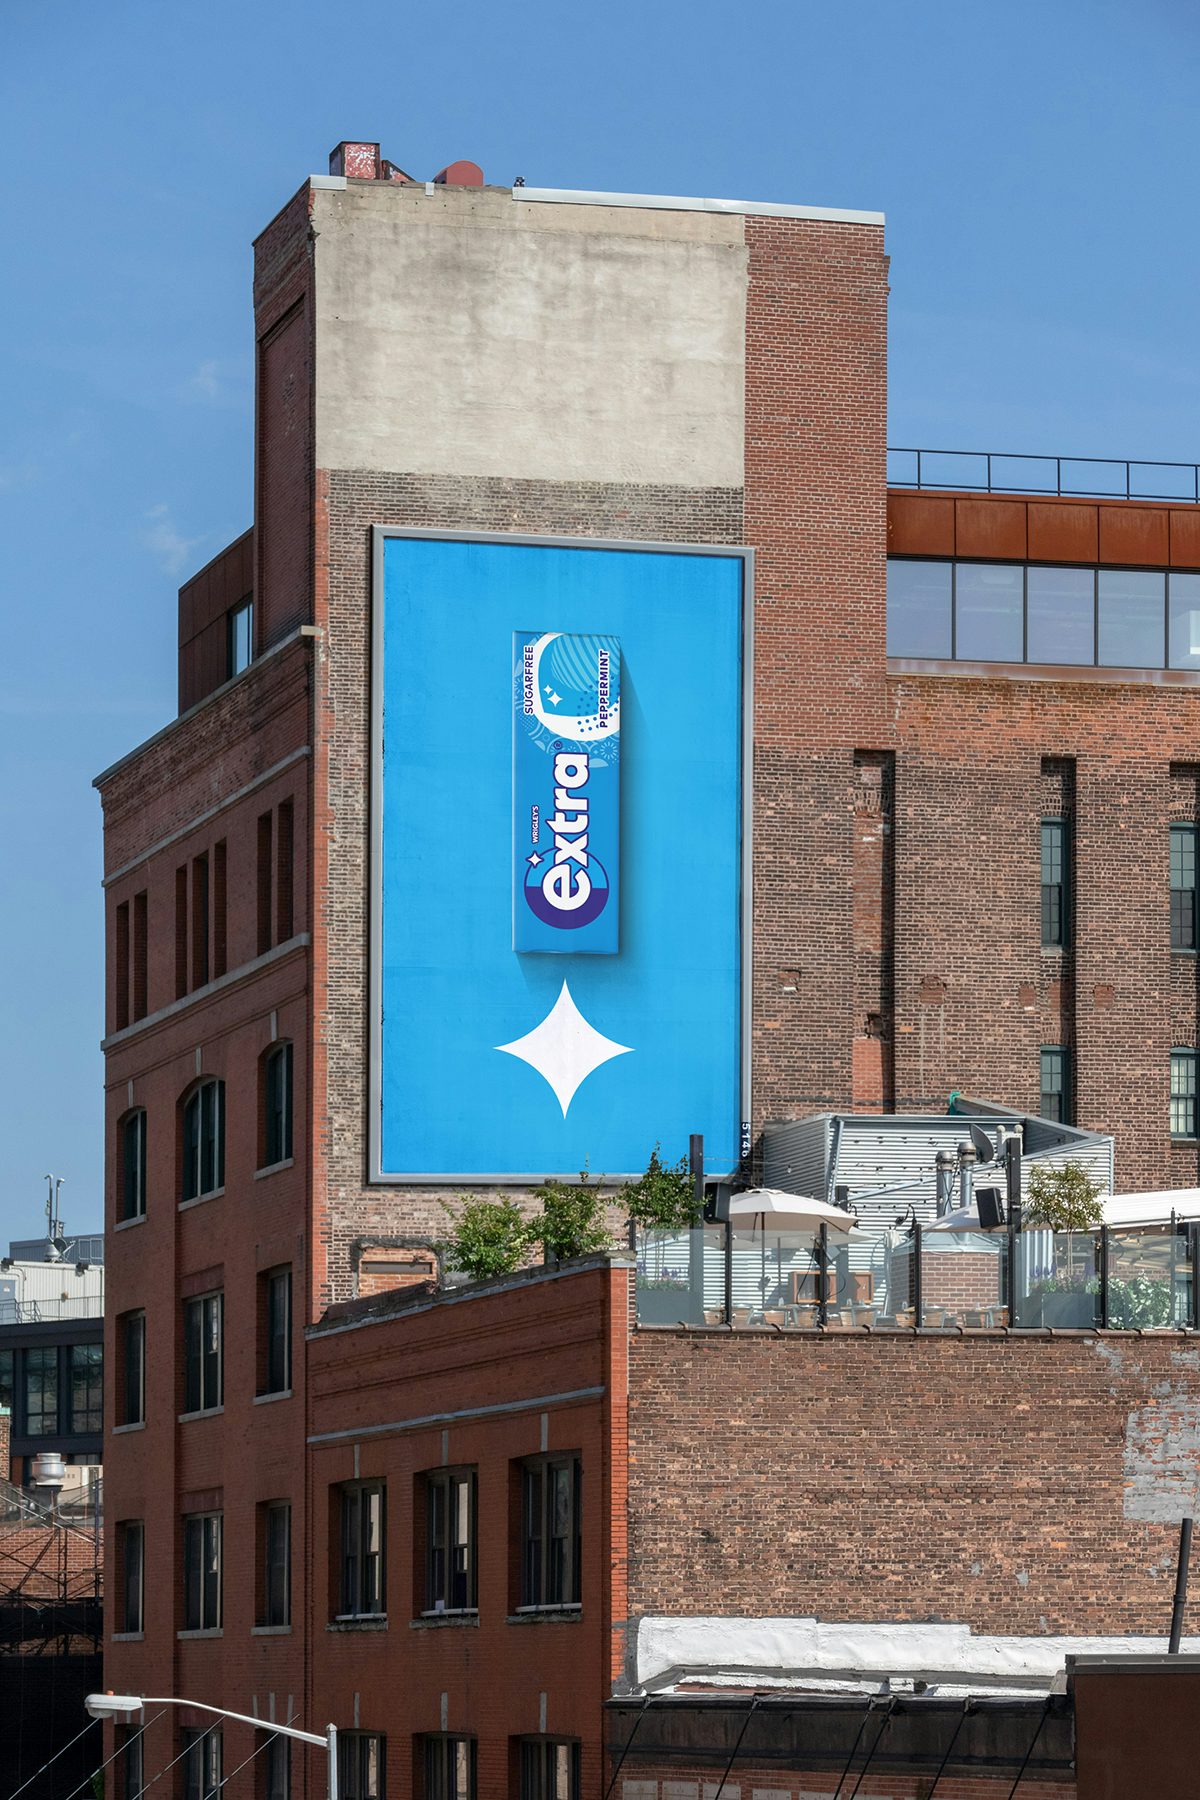 Photograph of a poster showing the new brand identity of Extra gum